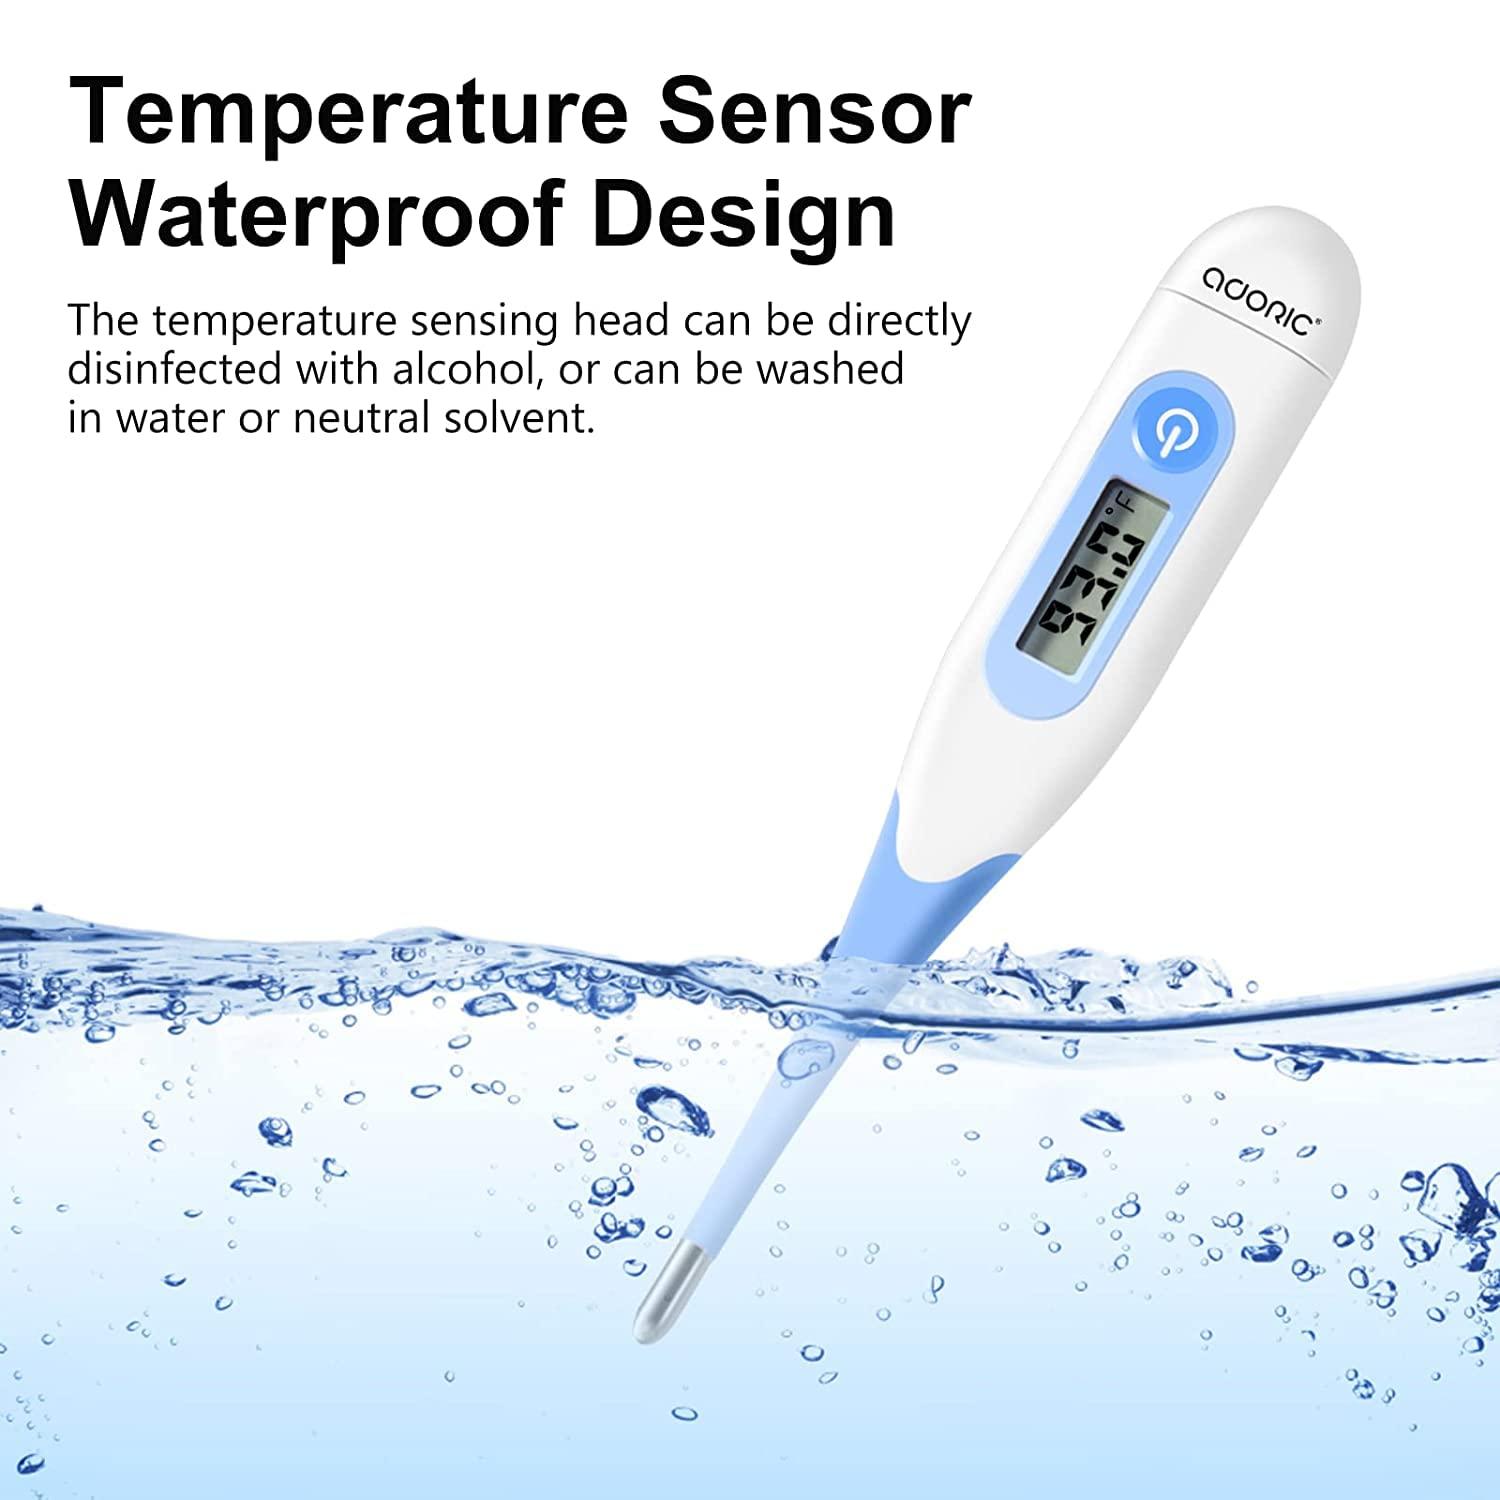 2 Easy Ways to Test a Thermometer for Accuracy